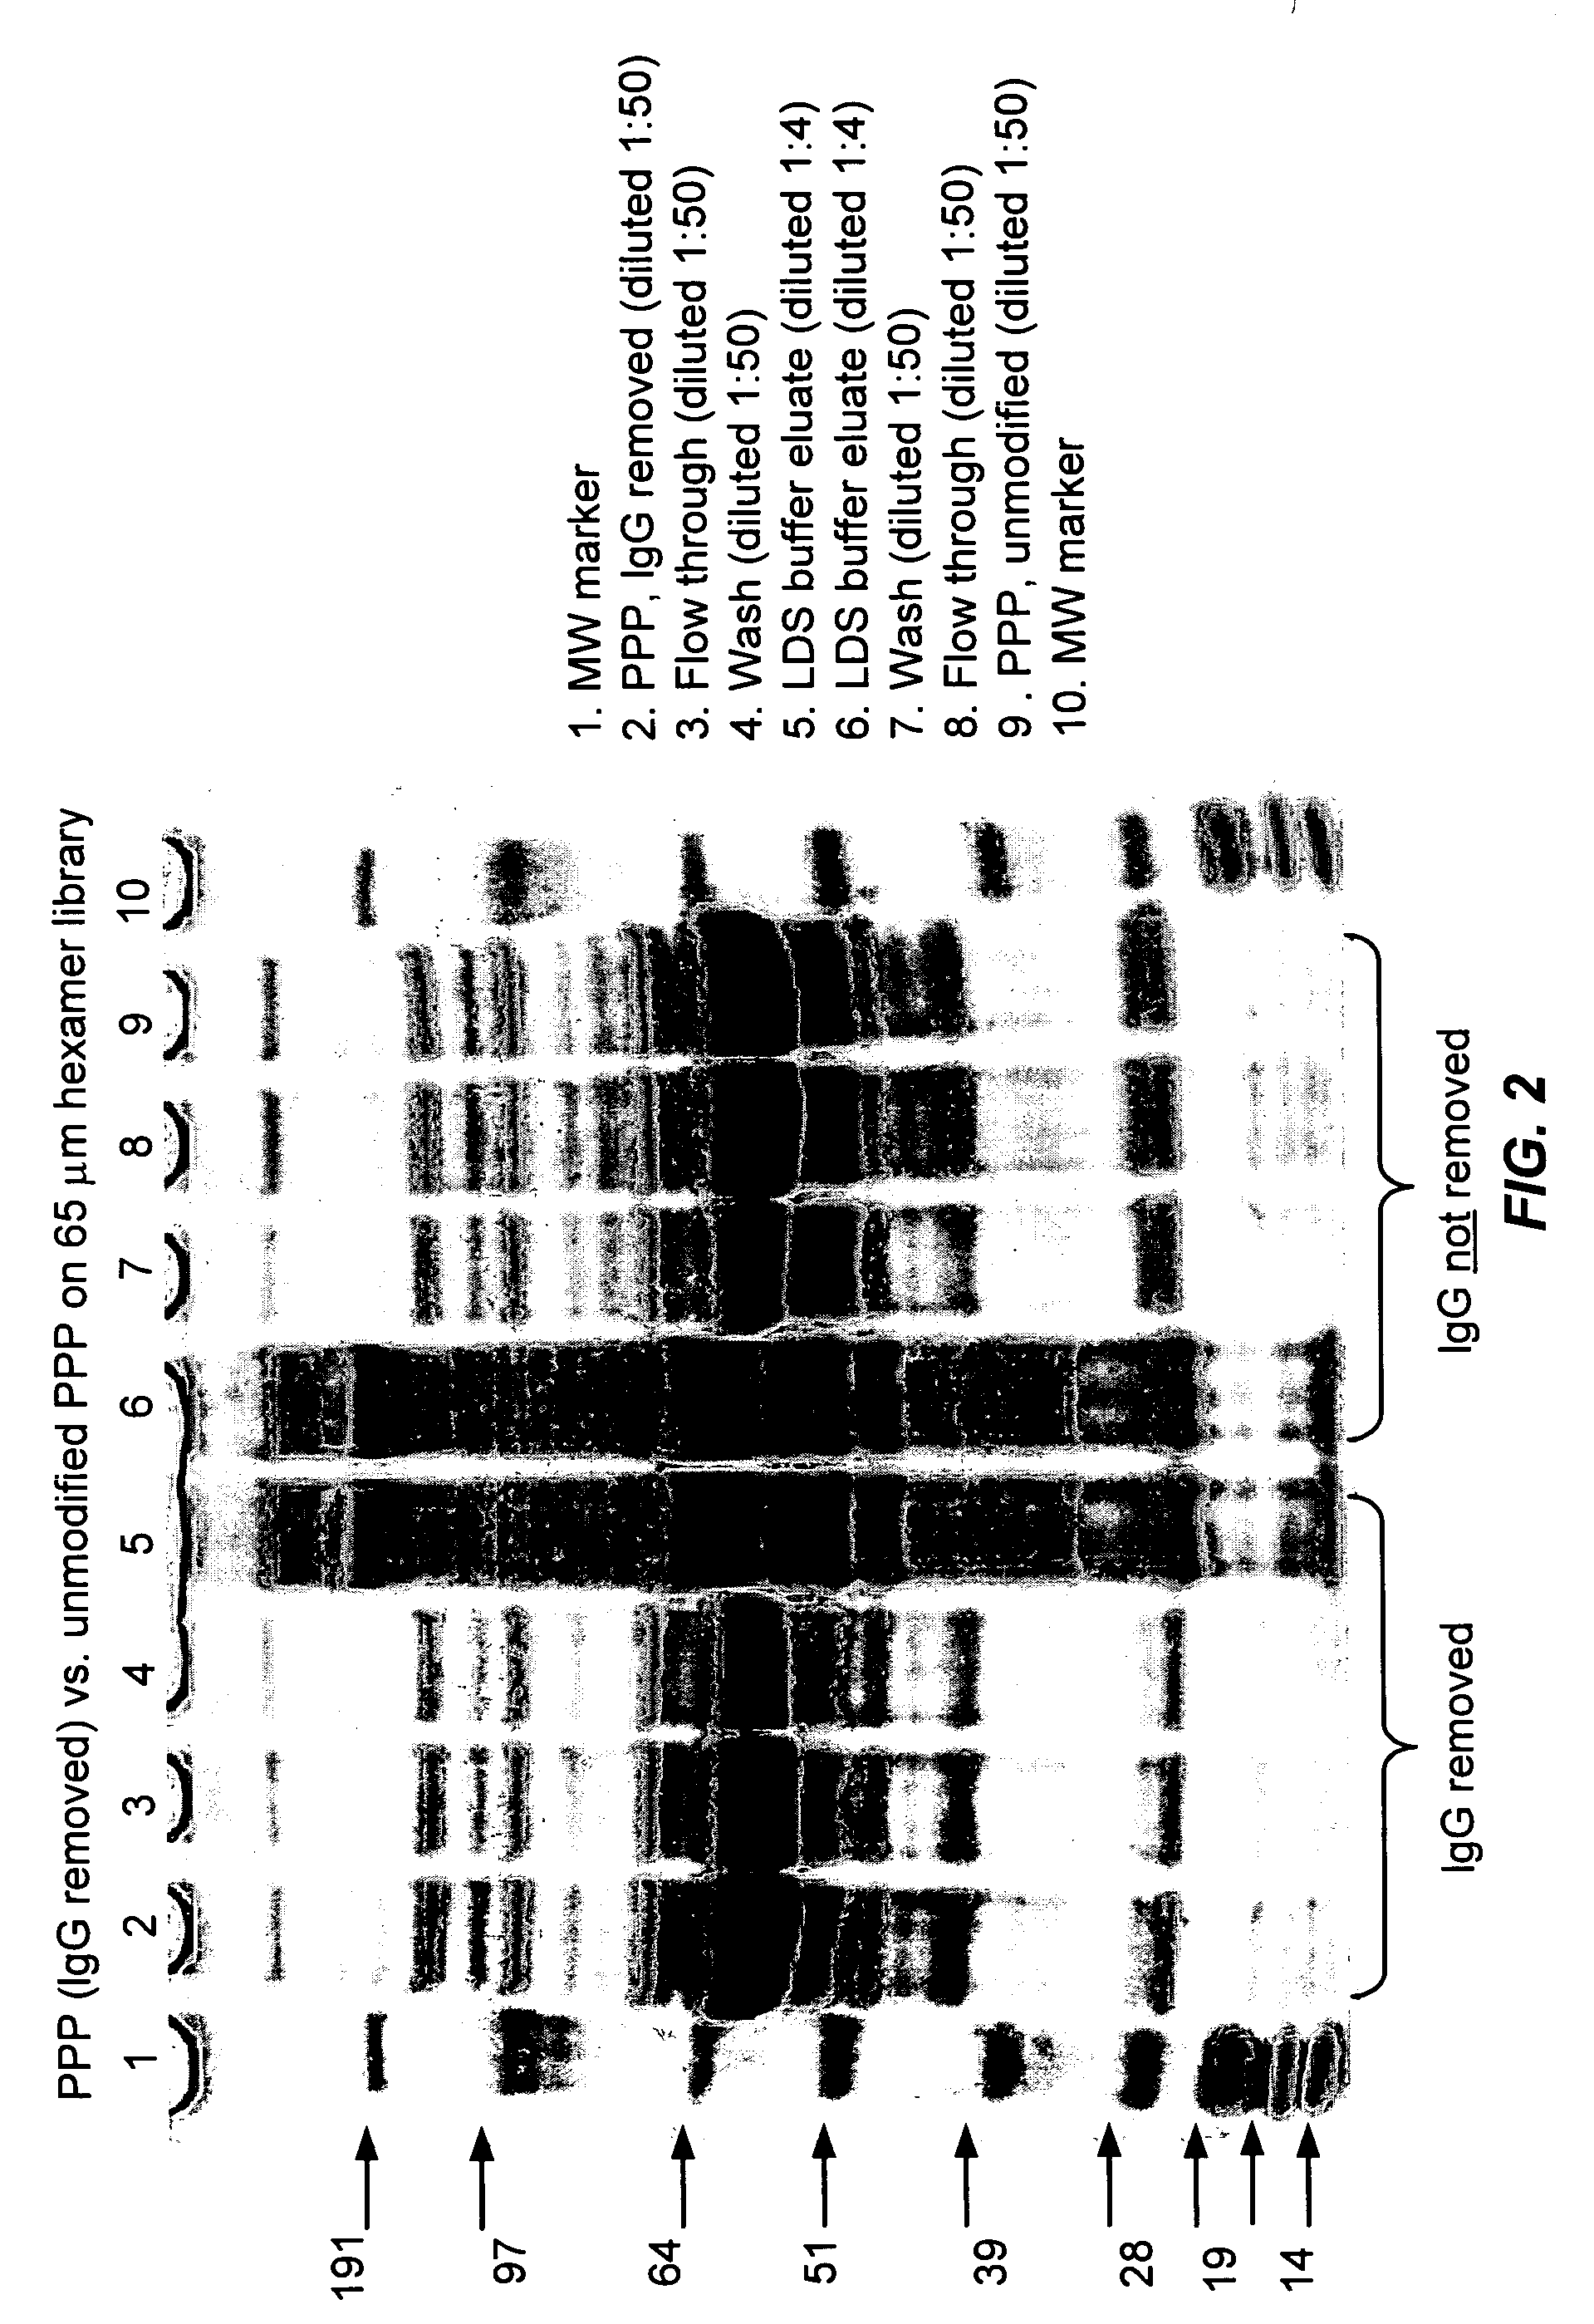 Methods for reducing the range in concentrations of analyte species in a sample